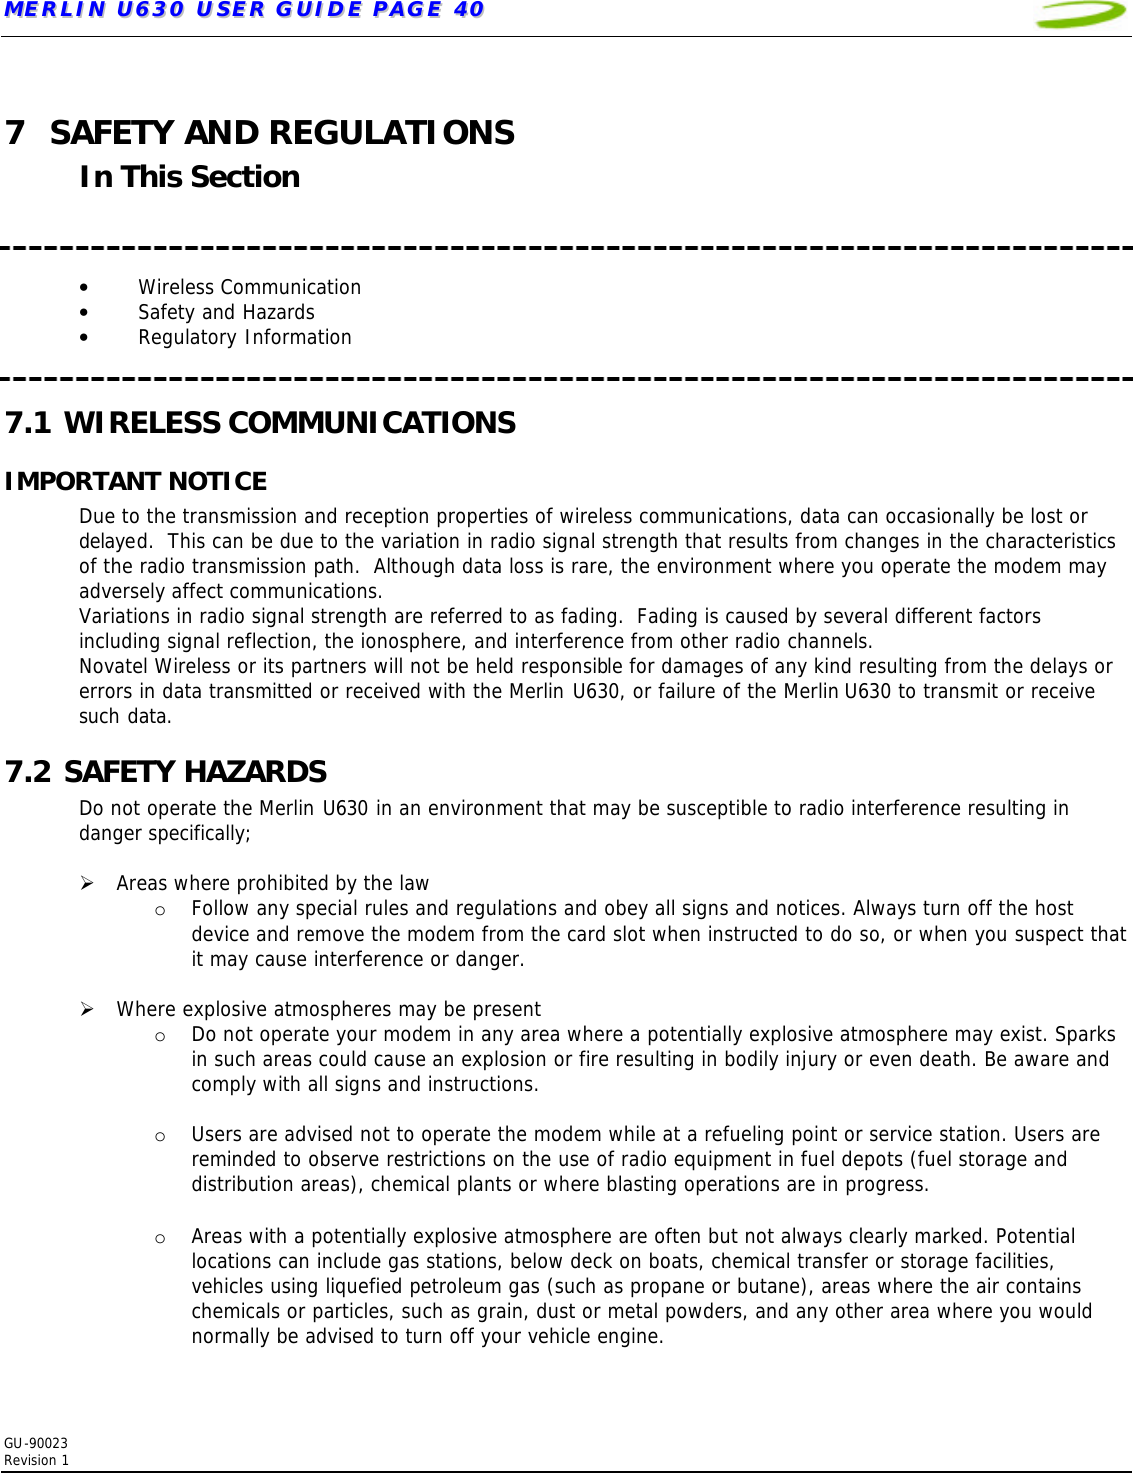 MMEERRLLIINN  UU663300  UUSSEERR  GGUUIIDDEE  PPAAGGEE  4400   GU-90023  Revision 1   7 SAFETY AND REGULATIONS In This Section    • Wireless Communication • Safety and Hazards • Regulatory Information  7.1 WIRELESS COMMUNICATIONS IMPORTANT NOTICE Due to the transmission and reception properties of wireless communications, data can occasionally be lost or delayed.  This can be due to the variation in radio signal strength that results from changes in the characteristics of the radio transmission path.  Although data loss is rare, the environment where you operate the modem may adversely affect communications. Variations in radio signal strength are referred to as fading.  Fading is caused by several different factors including signal reflection, the ionosphere, and interference from other radio channels.  Novatel Wireless or its partners will not be held responsible for damages of any kind resulting from the delays or errors in data transmitted or received with the Merlin U630, or failure of the Merlin U630 to transmit or receive such data. 7.2 SAFETY HAZARDS Do not operate the Merlin U630 in an environment that may be susceptible to radio interference resulting in danger specifically;  Ø Areas where prohibited by the law o Follow any special rules and regulations and obey all signs and notices. Always turn off the host device and remove the modem from the card slot when instructed to do so, or when you suspect that it may cause interference or danger.  Ø Where explosive atmospheres may be present o Do not operate your modem in any area where a potentially explosive atmosphere may exist. Sparks in such areas could cause an explosion or fire resulting in bodily injury or even death. Be aware and comply with all signs and instructions.  o Users are advised not to operate the modem while at a refueling point or service station. Users are reminded to observe restrictions on the use of radio equipment in fuel depots (fuel storage and distribution areas), chemical plants or where blasting operations are in progress.   o Areas with a potentially explosive atmosphere are often but not always clearly marked. Potential locations can include gas stations, below deck on boats, chemical transfer or storage facilities, vehicles using liquefied petroleum gas (such as propane or butane), areas where the air contains chemicals or particles, such as grain, dust or metal powders, and any other area where you would normally be advised to turn off your vehicle engine.  